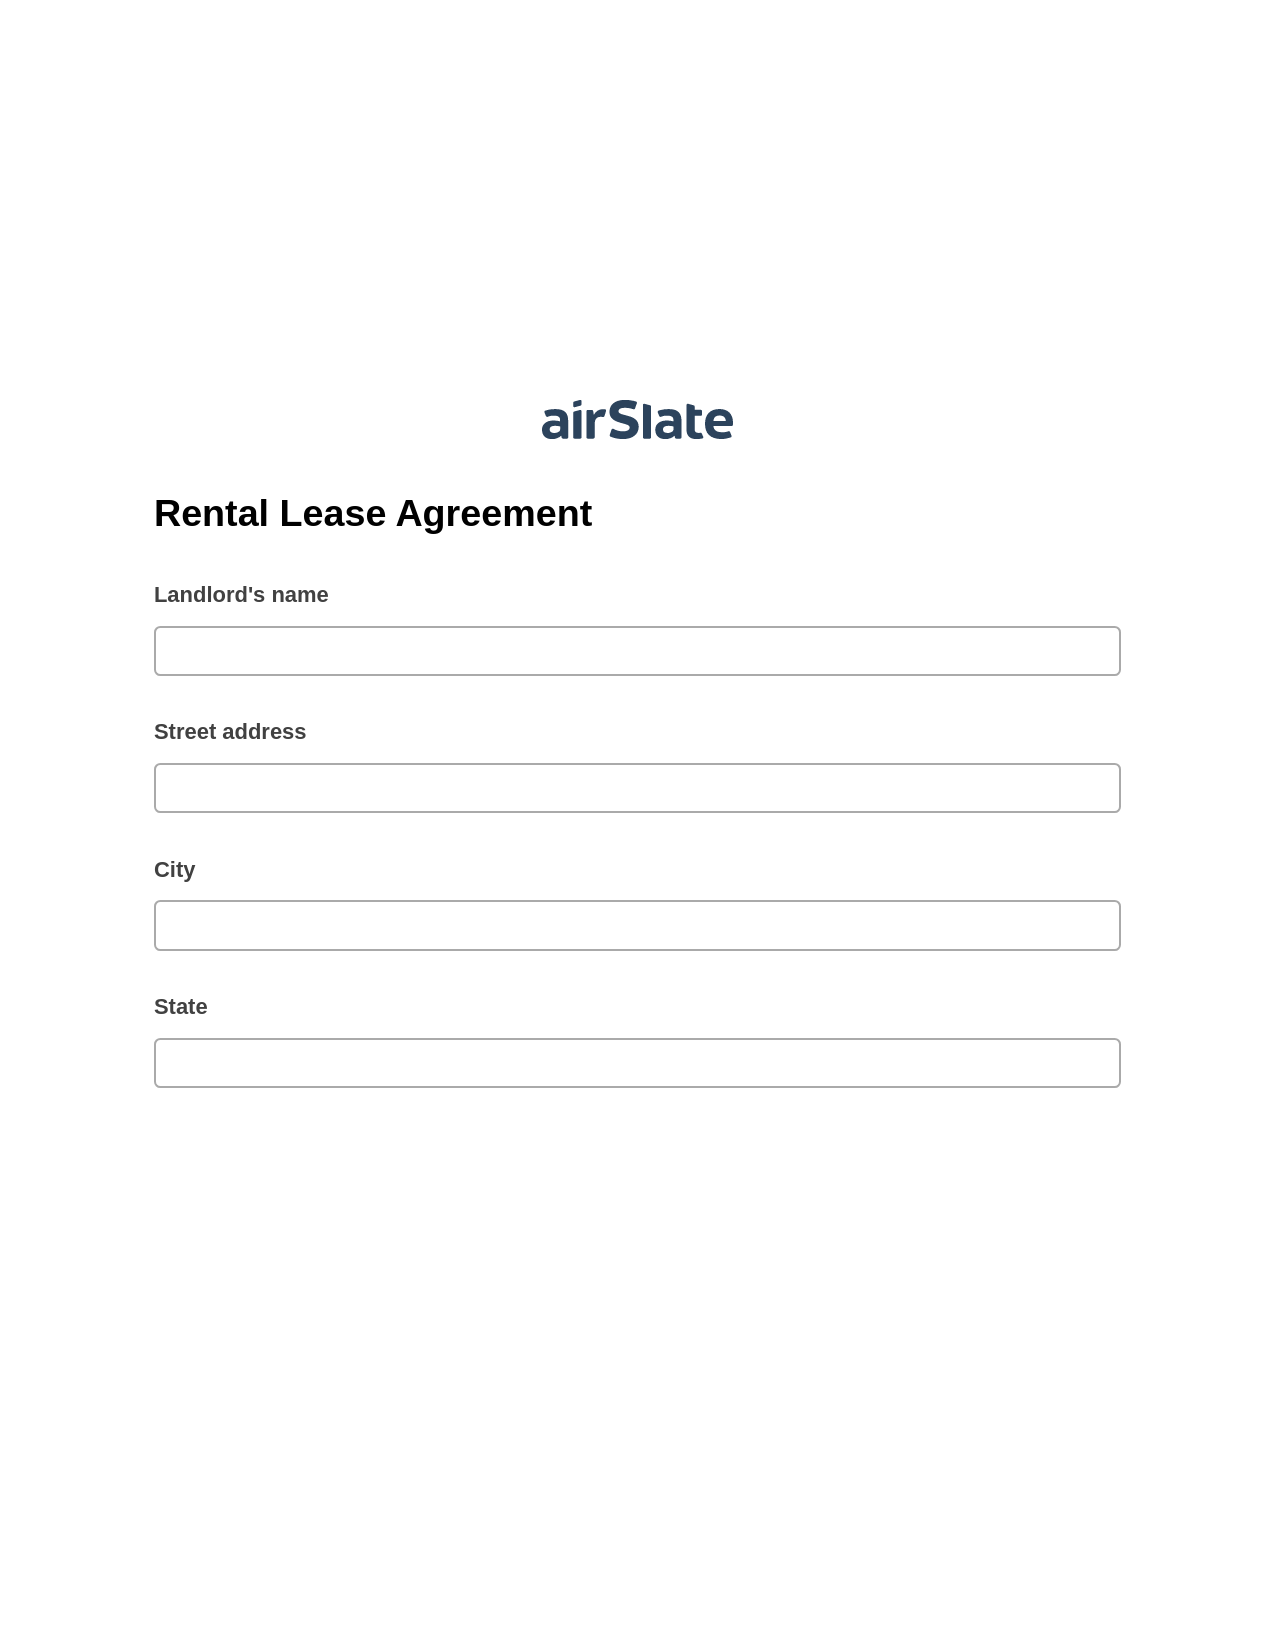 Rental Lease Agreement Pre-fill from MySQL Dropdown Options Bot, Create NetSuite Records Bot, Export to Smartsheet